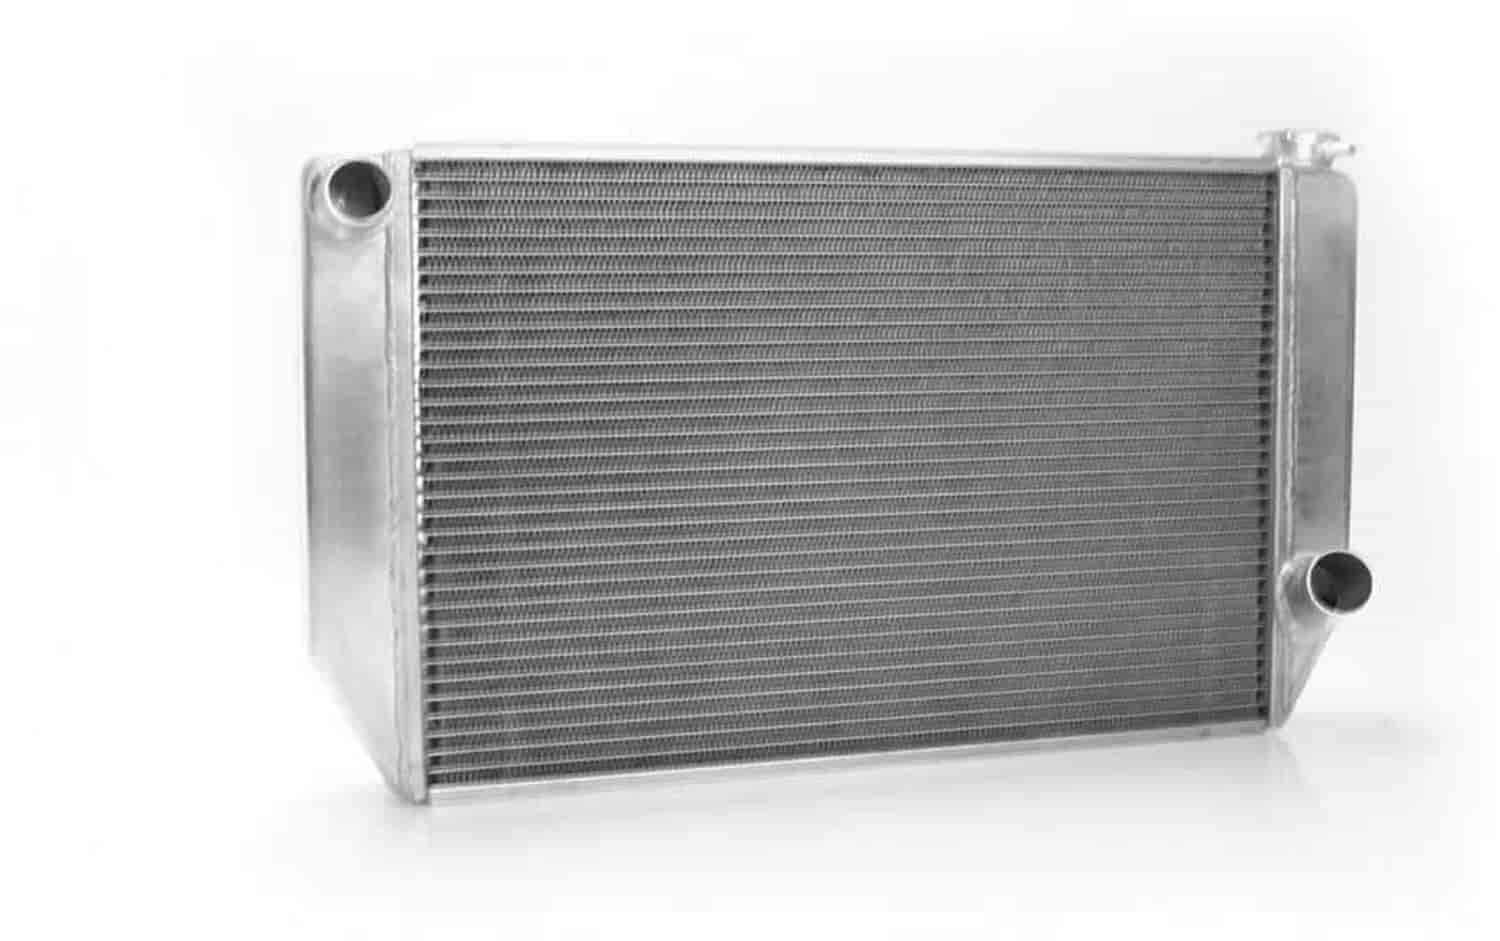 ClassicCool Universal Fit Radiator Single Pass Crossflow Design 27.50" x 15.50" with Straight Outlet